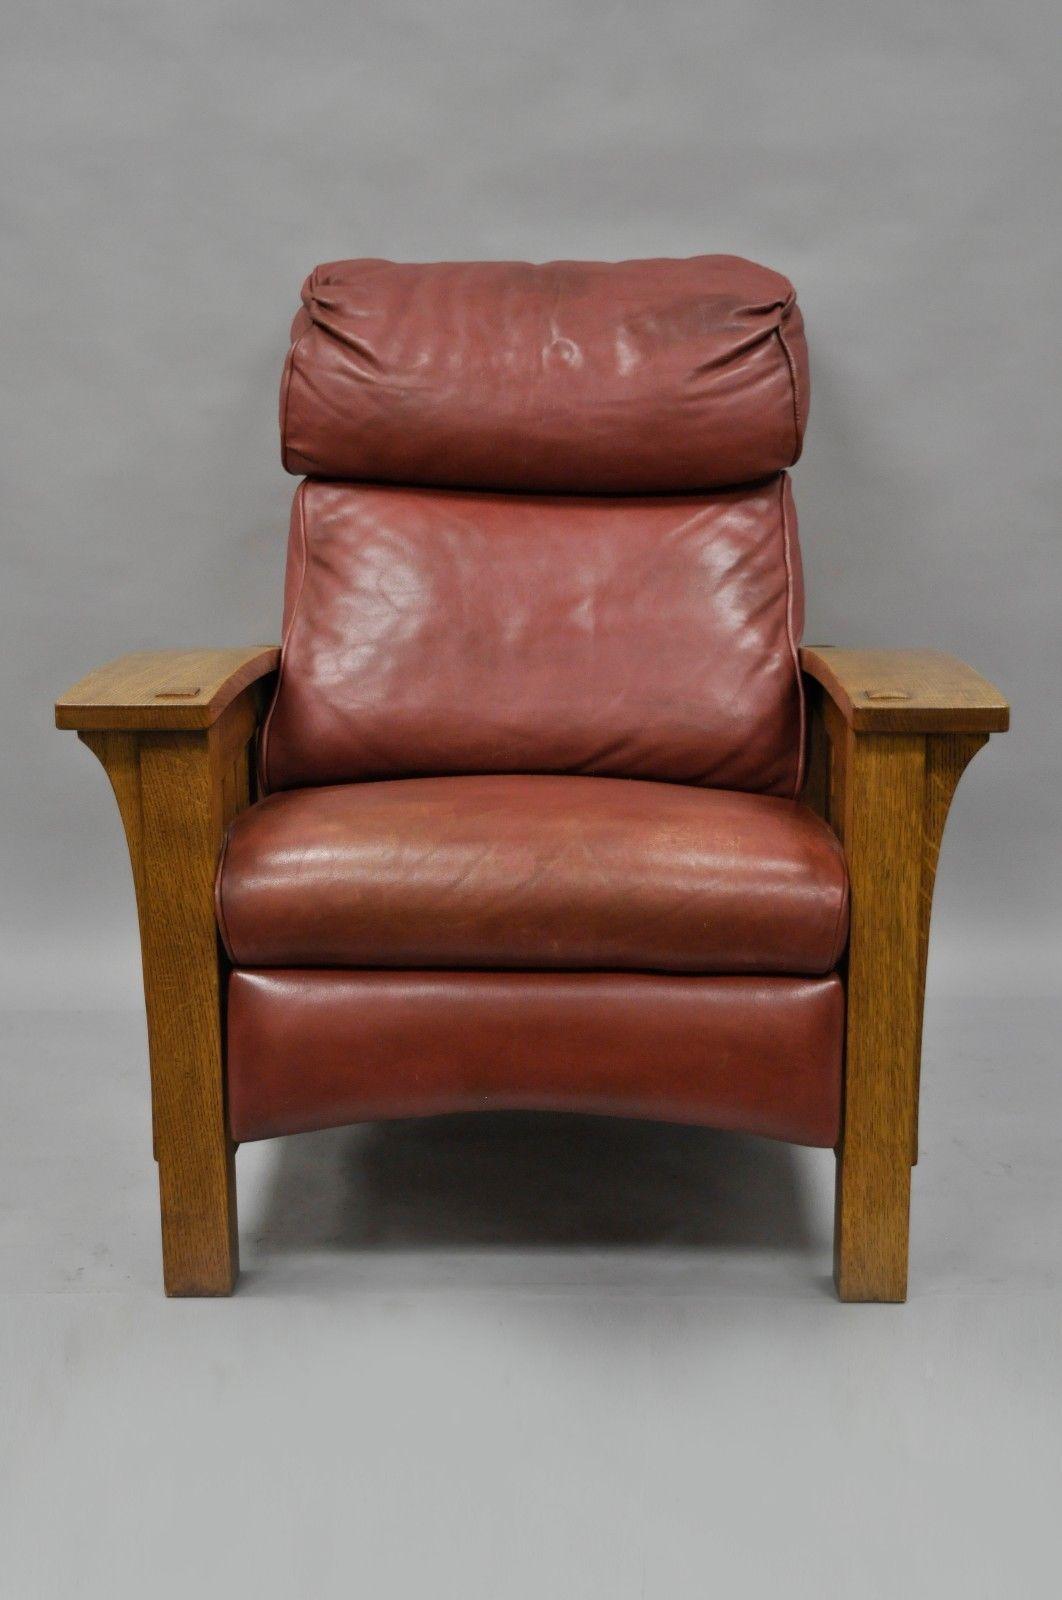 Stickley mission solid oak bustle back recliner lounge chair. Item features solid oak wood frame, long curved armrests, slat sides, and straight square legs. The bustle back cushion, seat cushion, and reclining footrest are upholstered in a